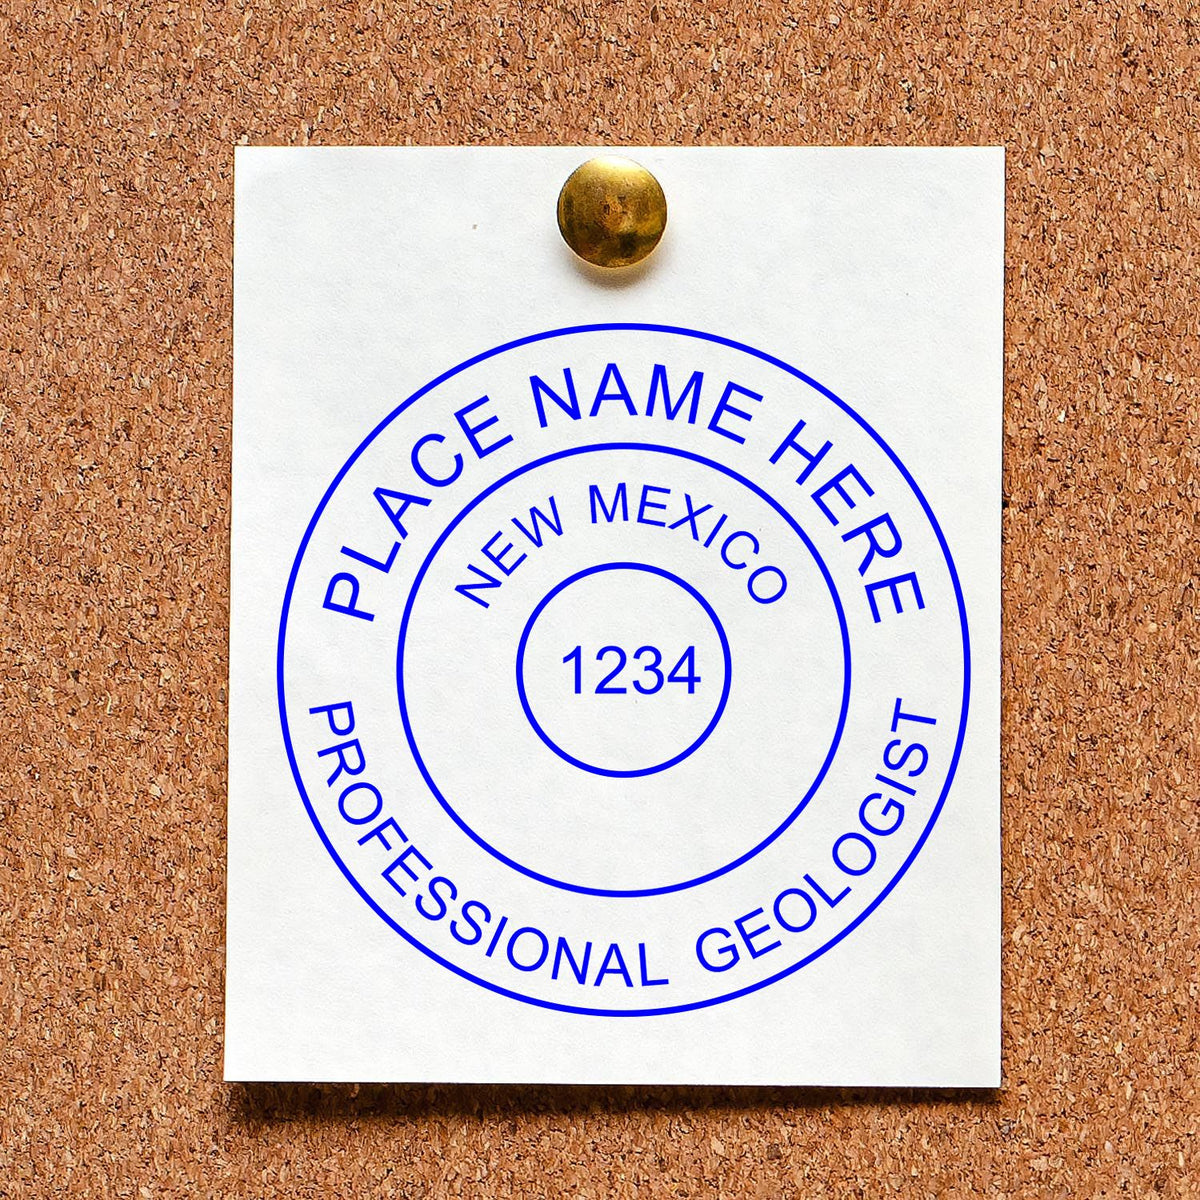 This paper is stamped with a sample imprint of the Self-Inking New Mexico Geologist Stamp, signifying its quality and reliability.